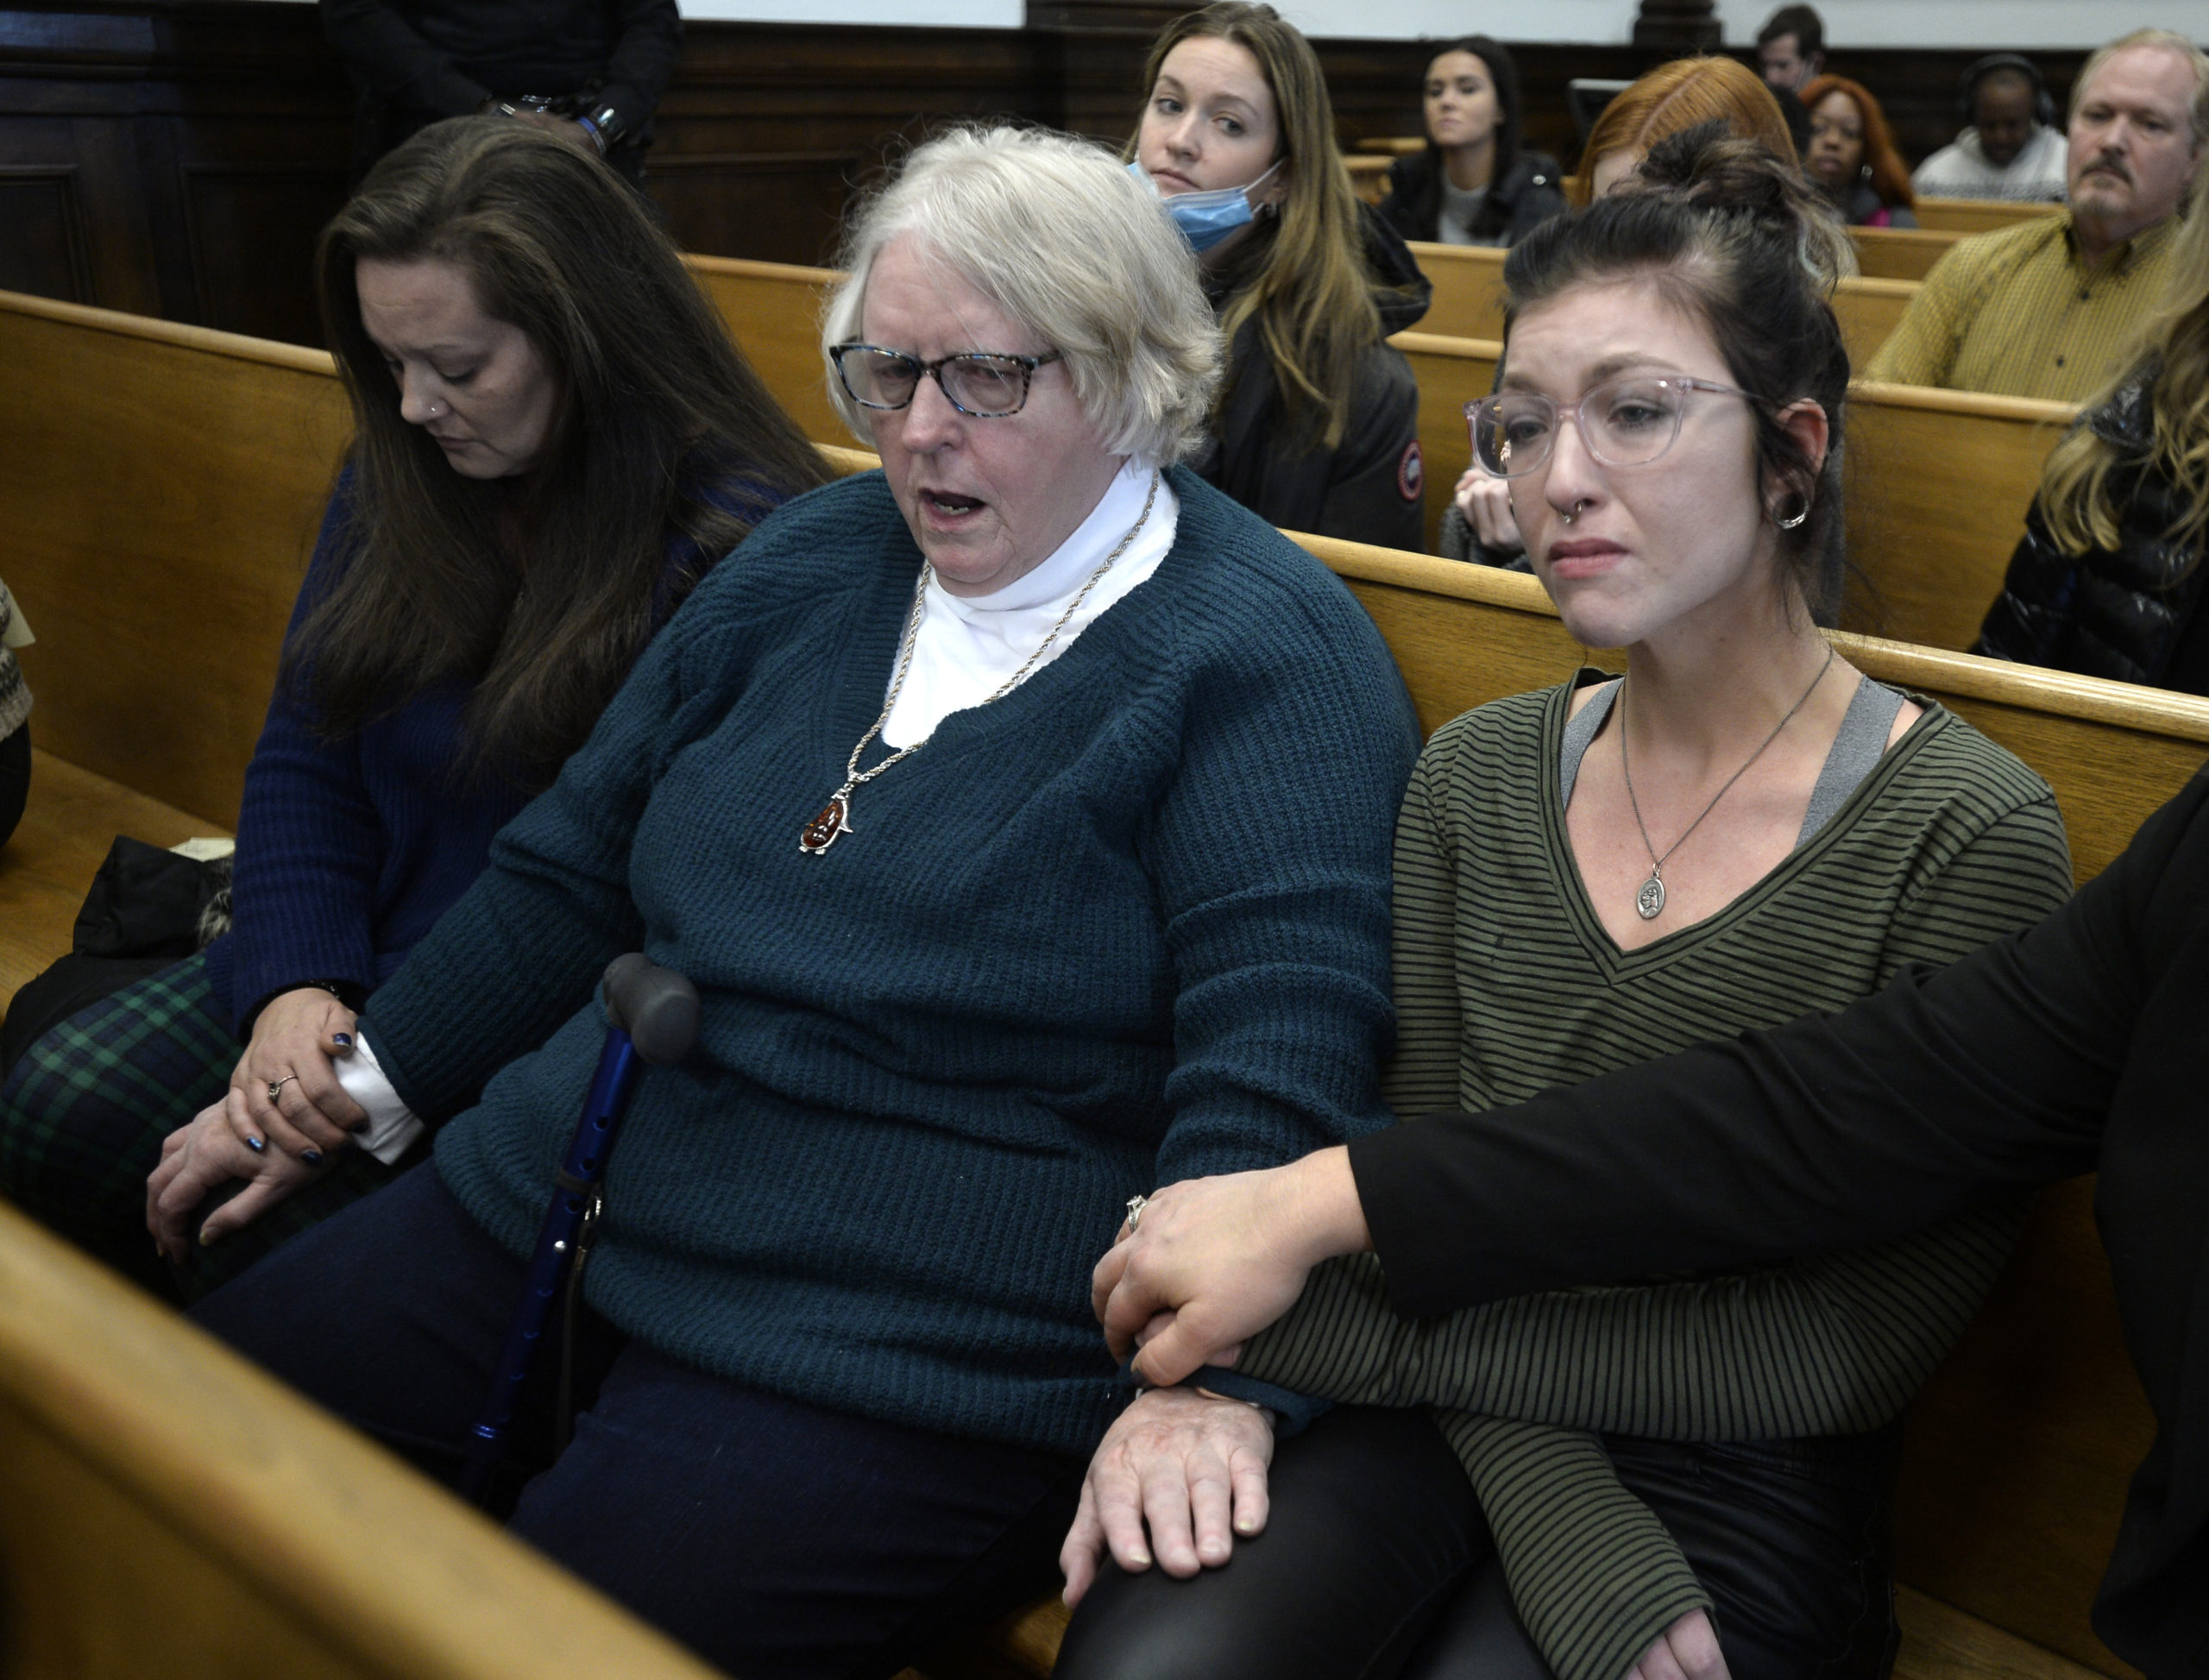 From left, Kariann Swart, Joseph Rosenbaum's fiancee, Susan Hughes, Anthony Huber's great aunt, and Hannah Gittings, Anthony Huber's girlfriend, listen as Kyle Rittenhouse is found not guilty at the Kenosha County Courthouse on November 19, 2021 in Kenosha, Wisconsin. (Sean Krajacic - Pool/Getty Images)